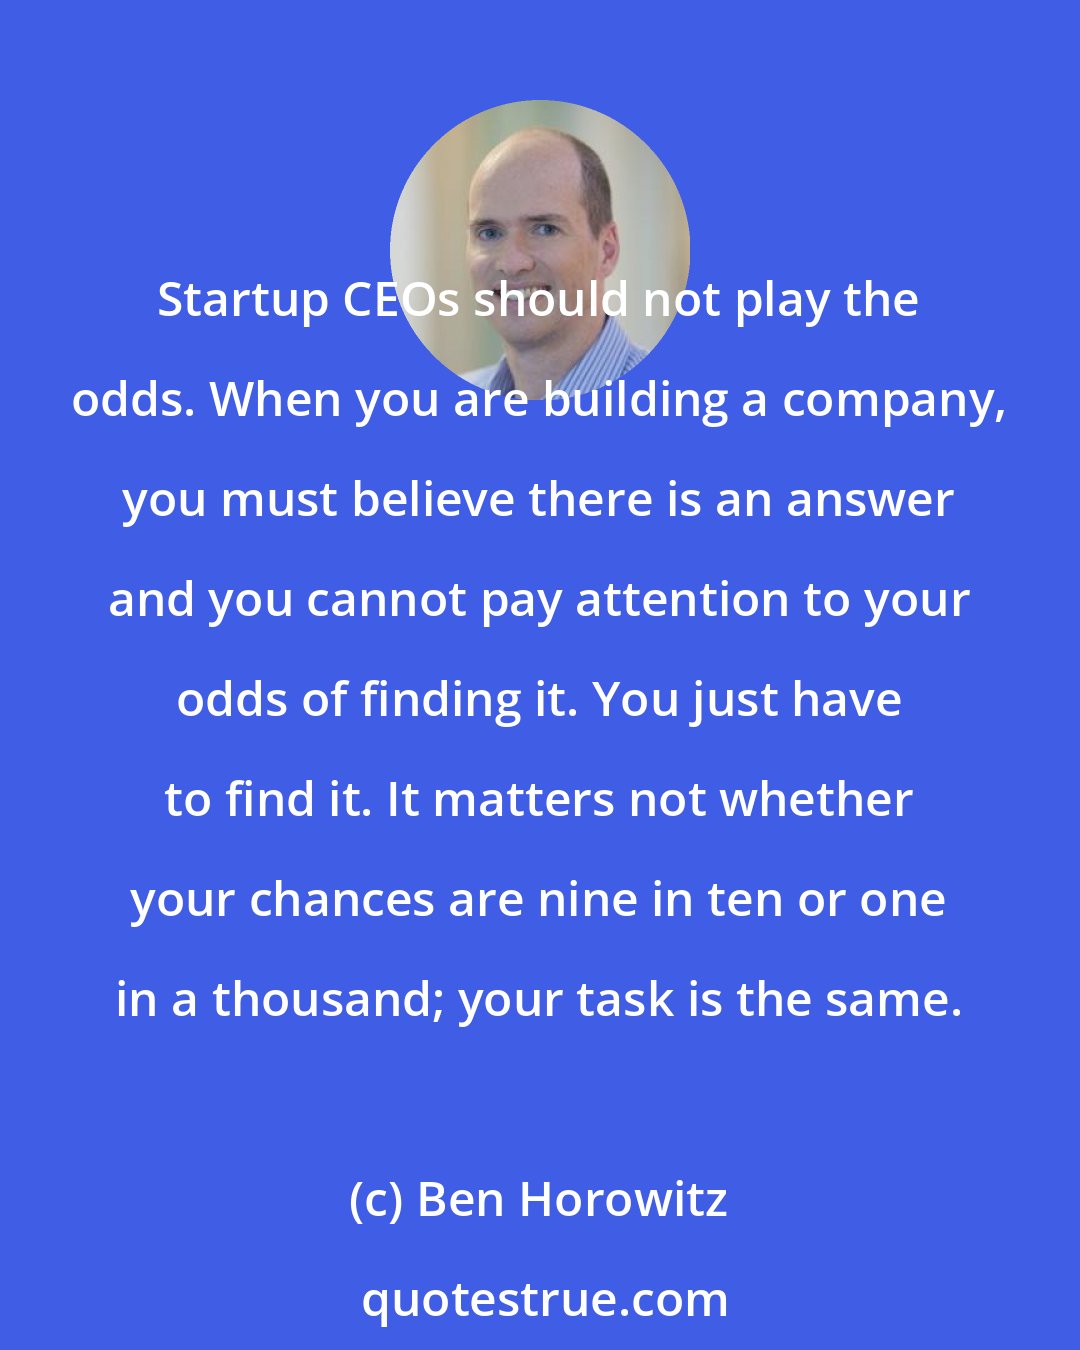 Ben Horowitz: Startup CEOs should not play the odds. When you are building a company, you must believe there is an answer and you cannot pay attention to your odds of finding it. You just have to find it. It matters not whether your chances are nine in ten or one in a thousand; your task is the same.